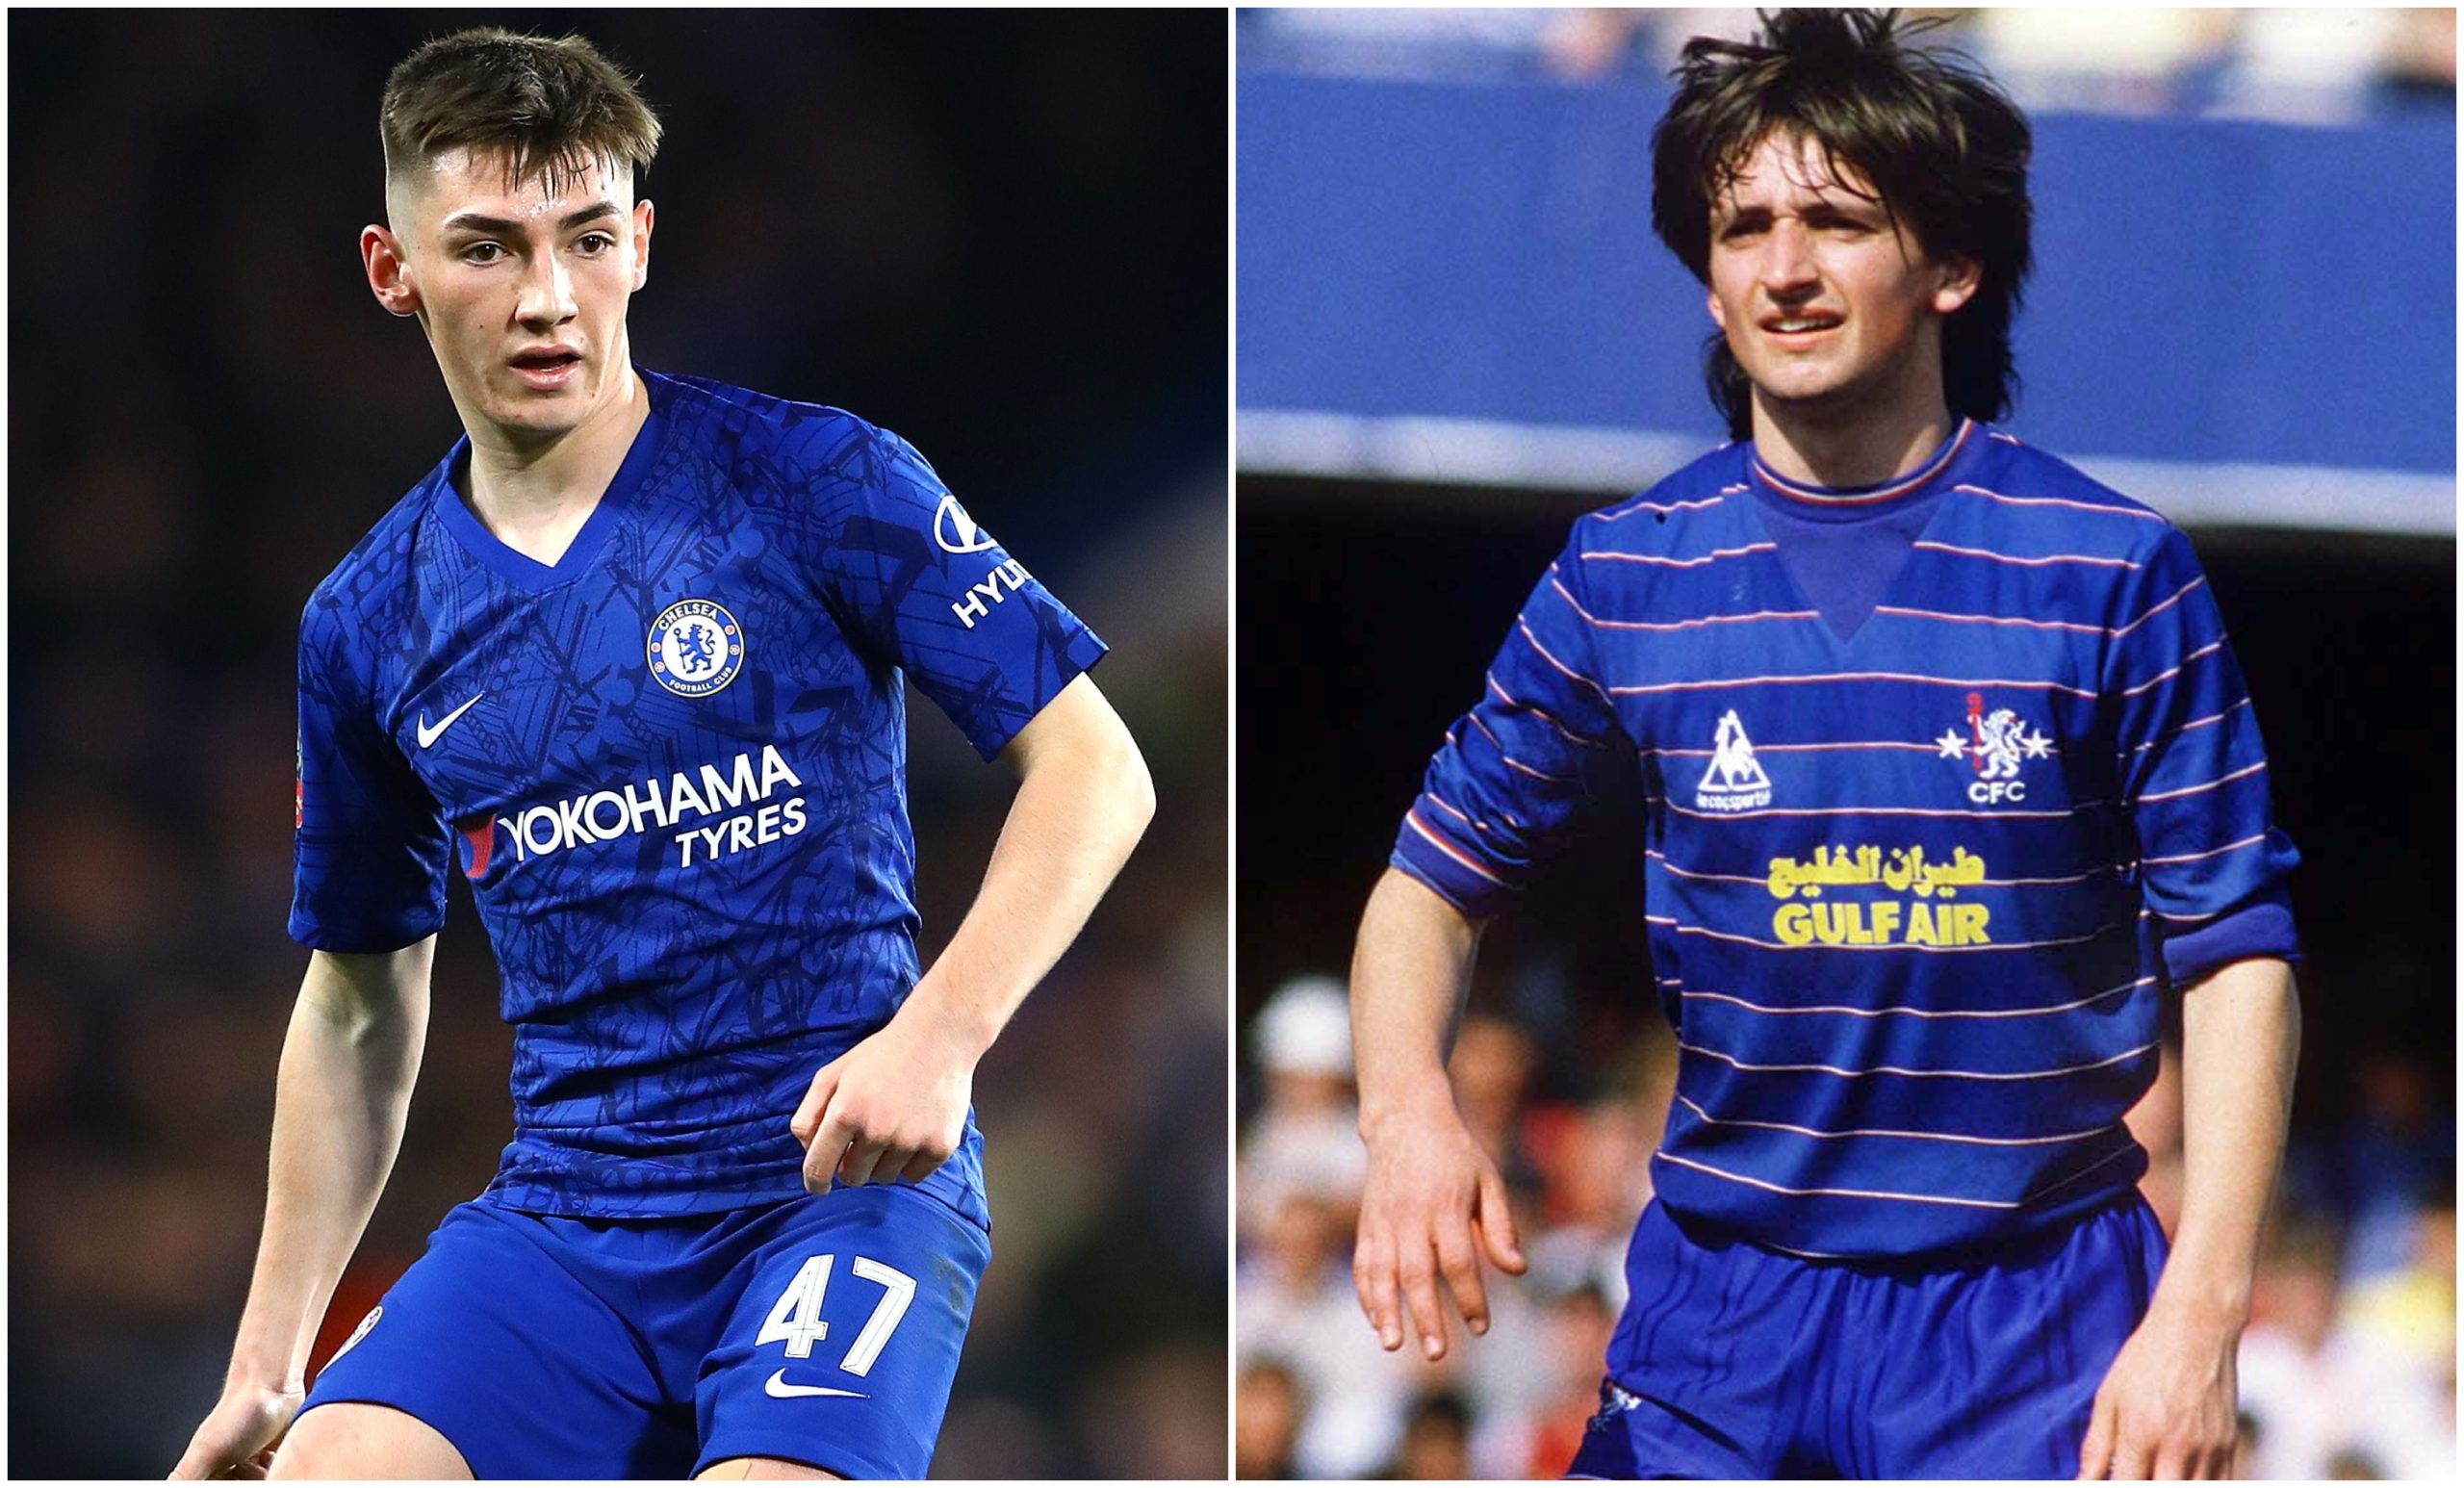 Ex-Scotland star Pat Nevin knows exactly what Billy Gilmour is going through at Chelsea